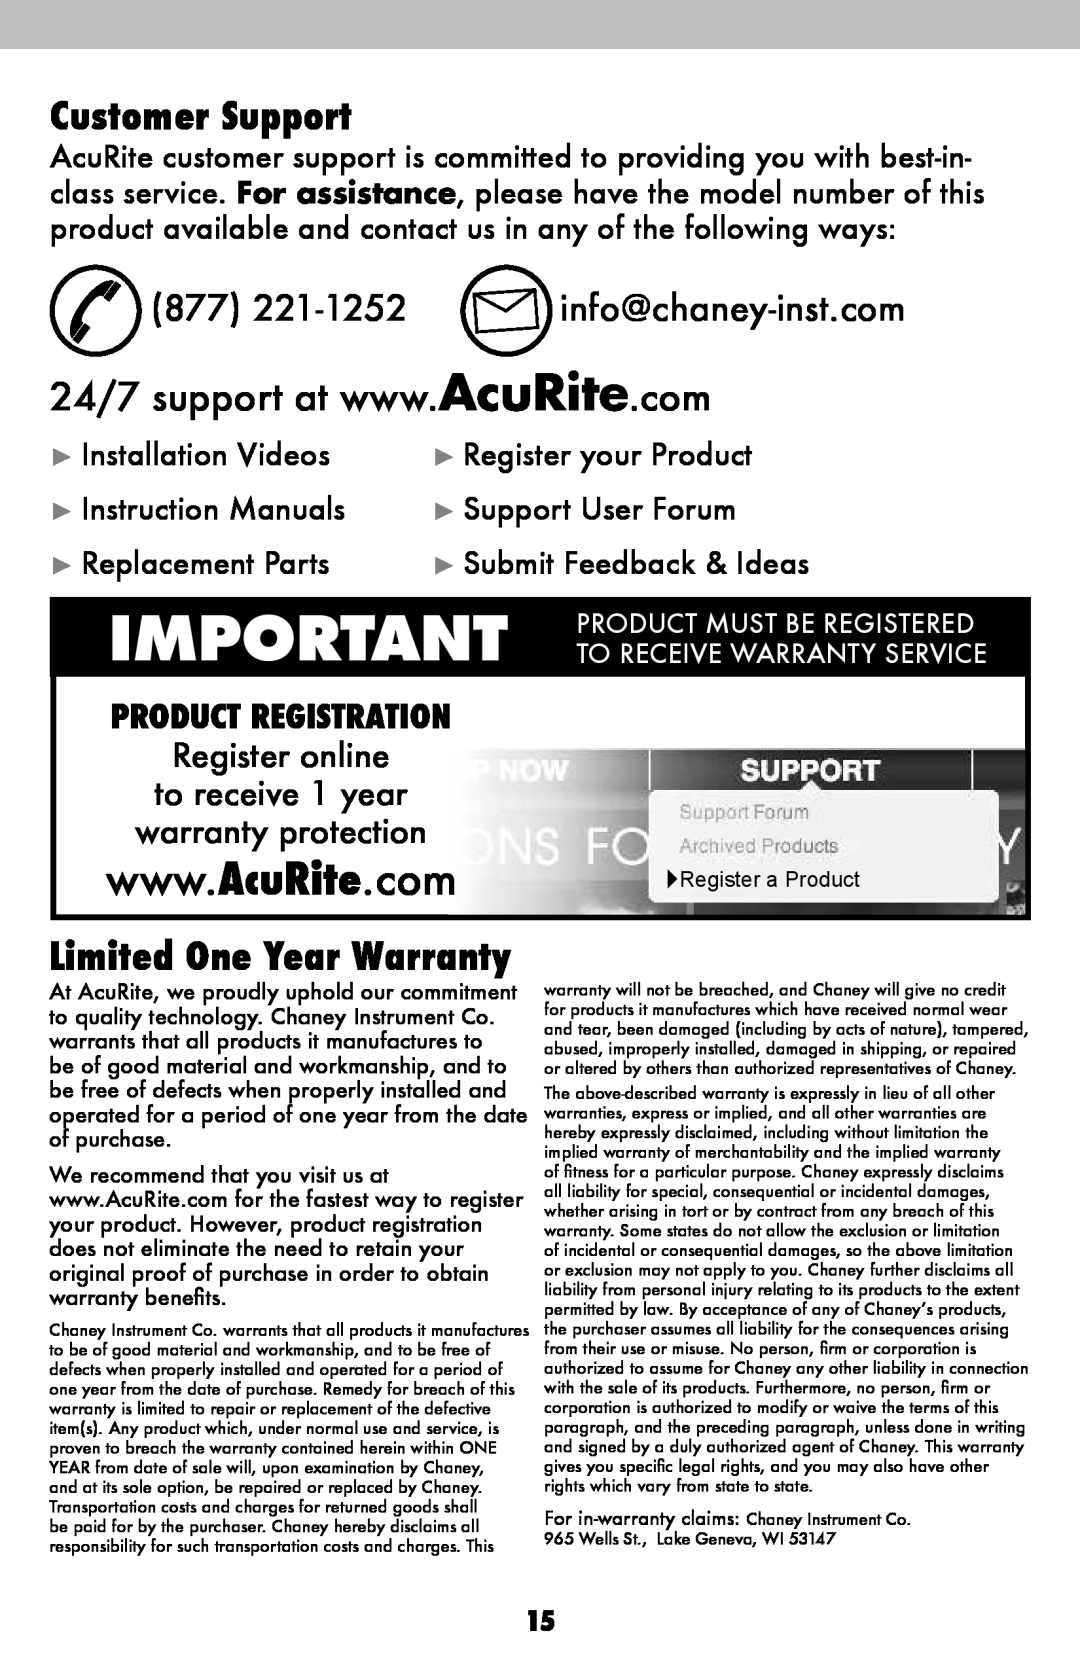 Acu-Rite 2027 Customer Support, 877 221-1252 info@chaney-inst.com, Limited One Year Warranty, Register online 